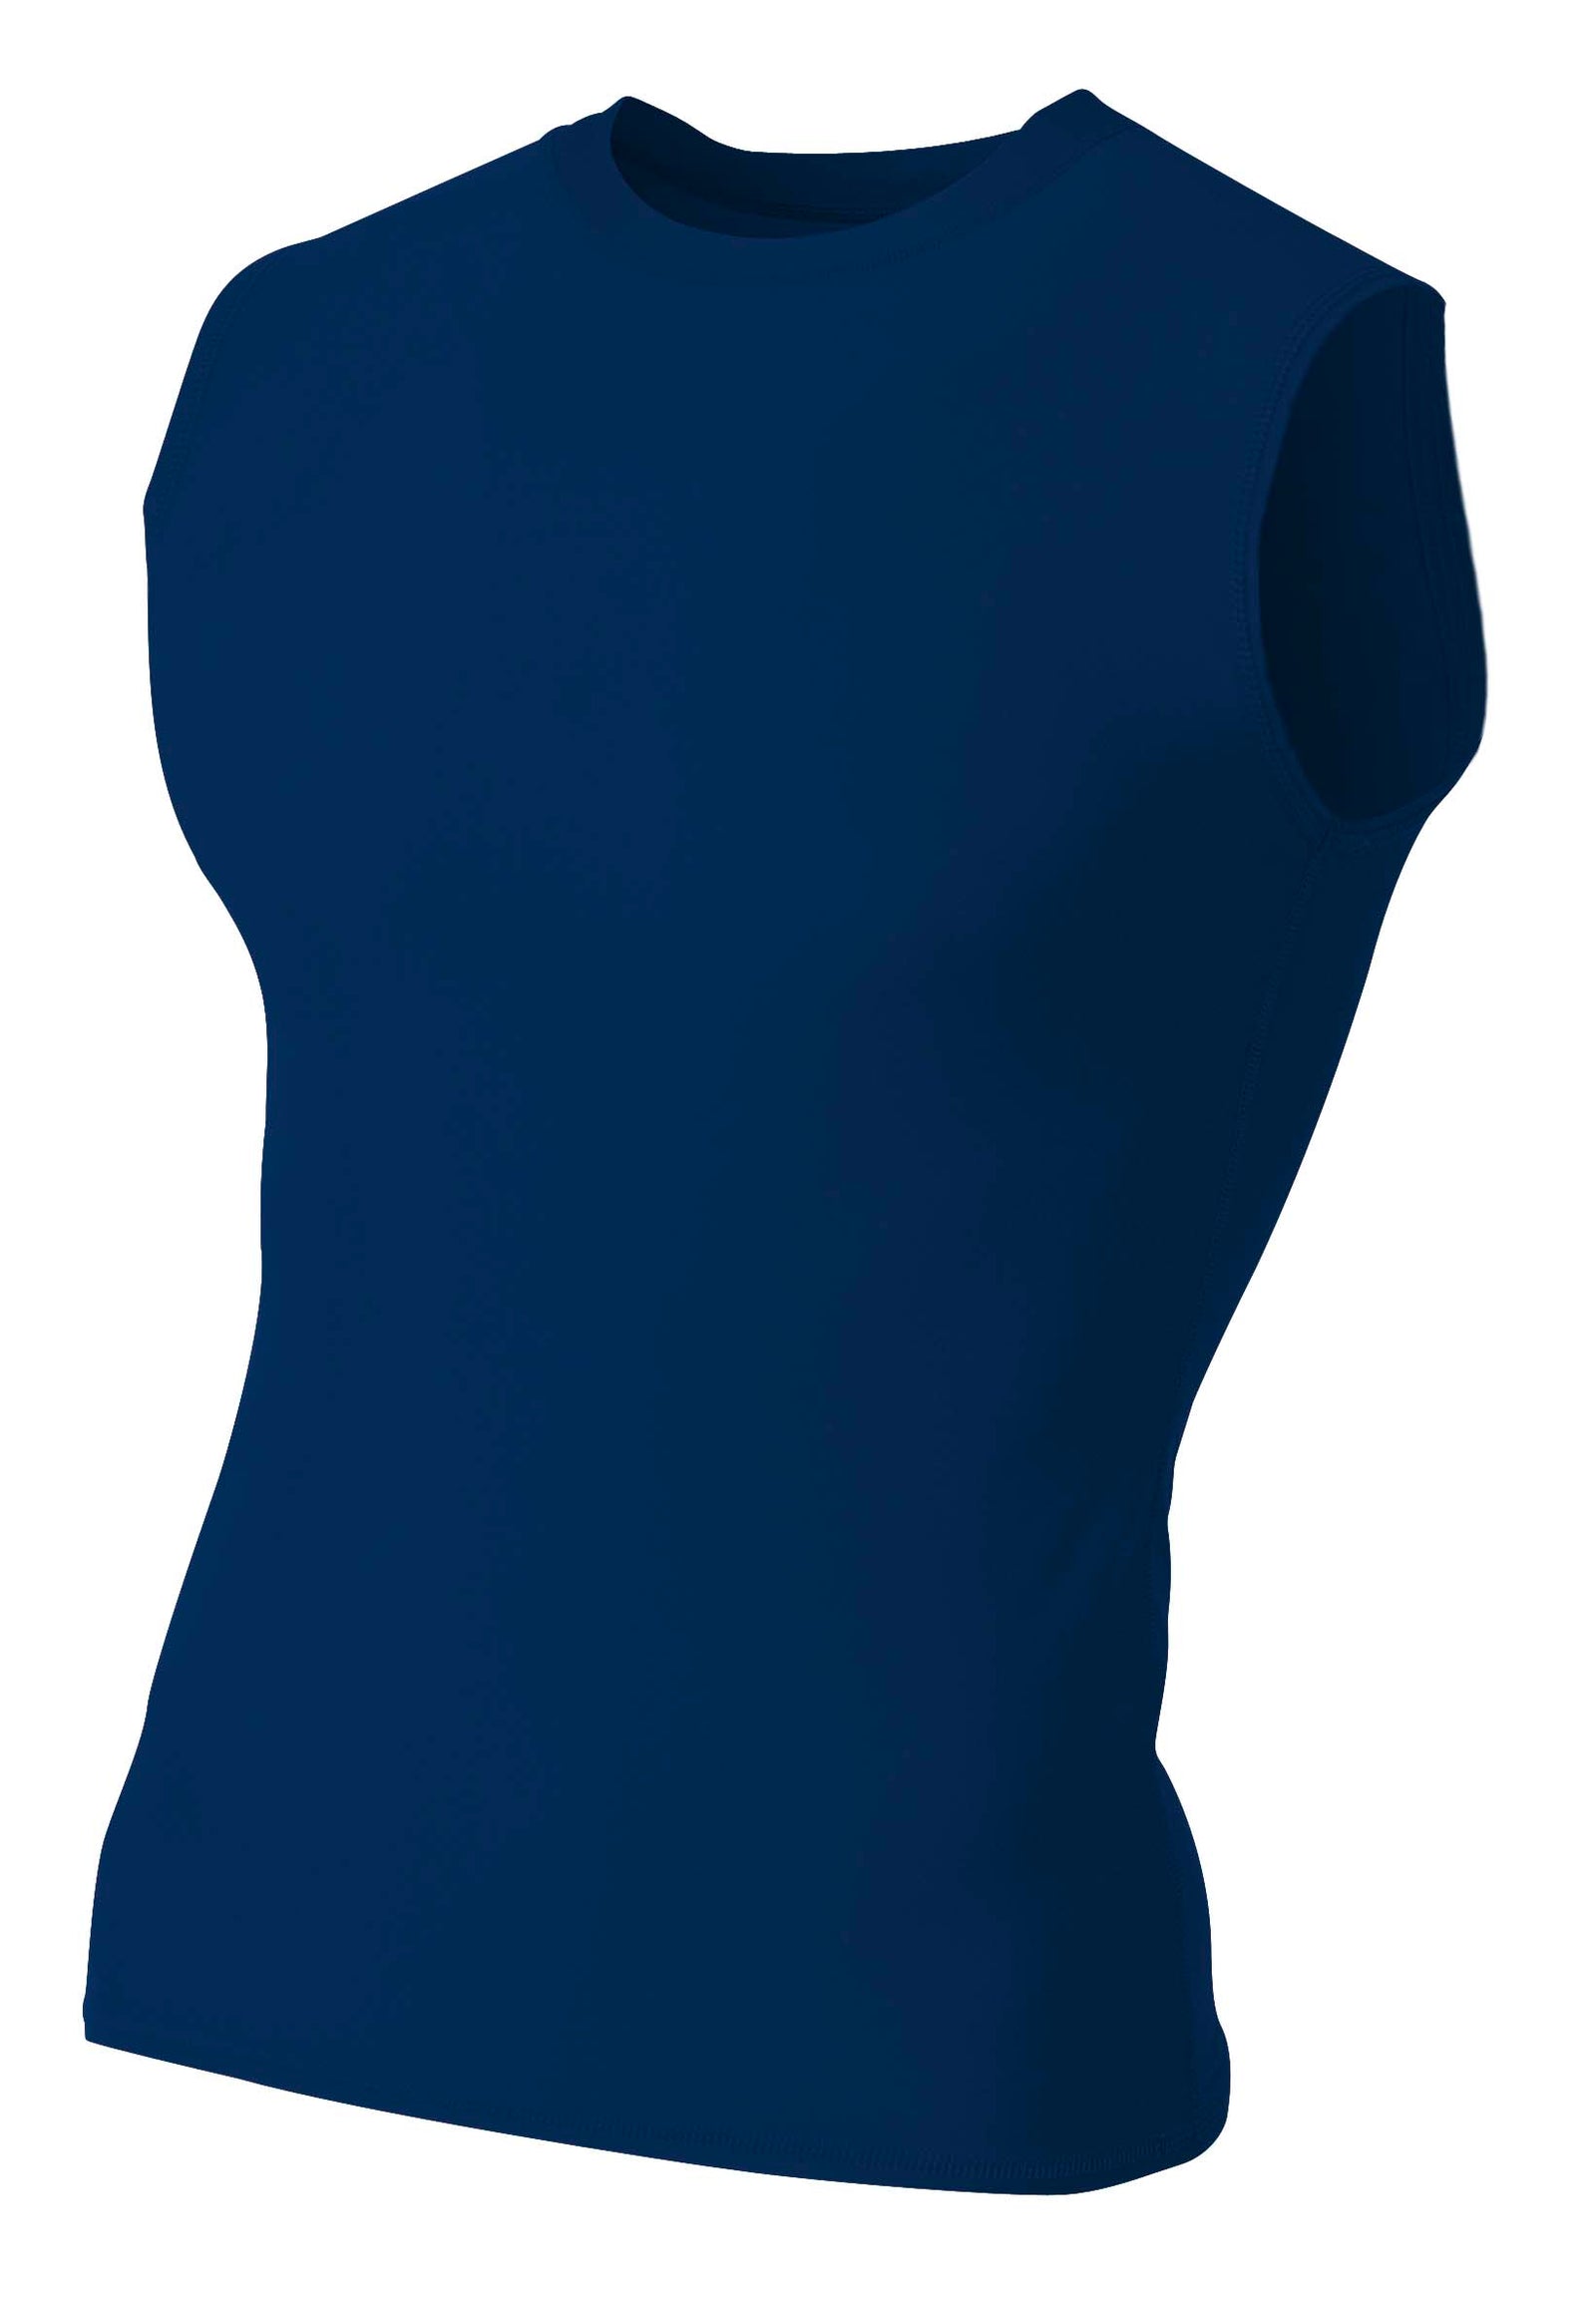 Navy 2011 A4 A4 Youth Compression Muscle